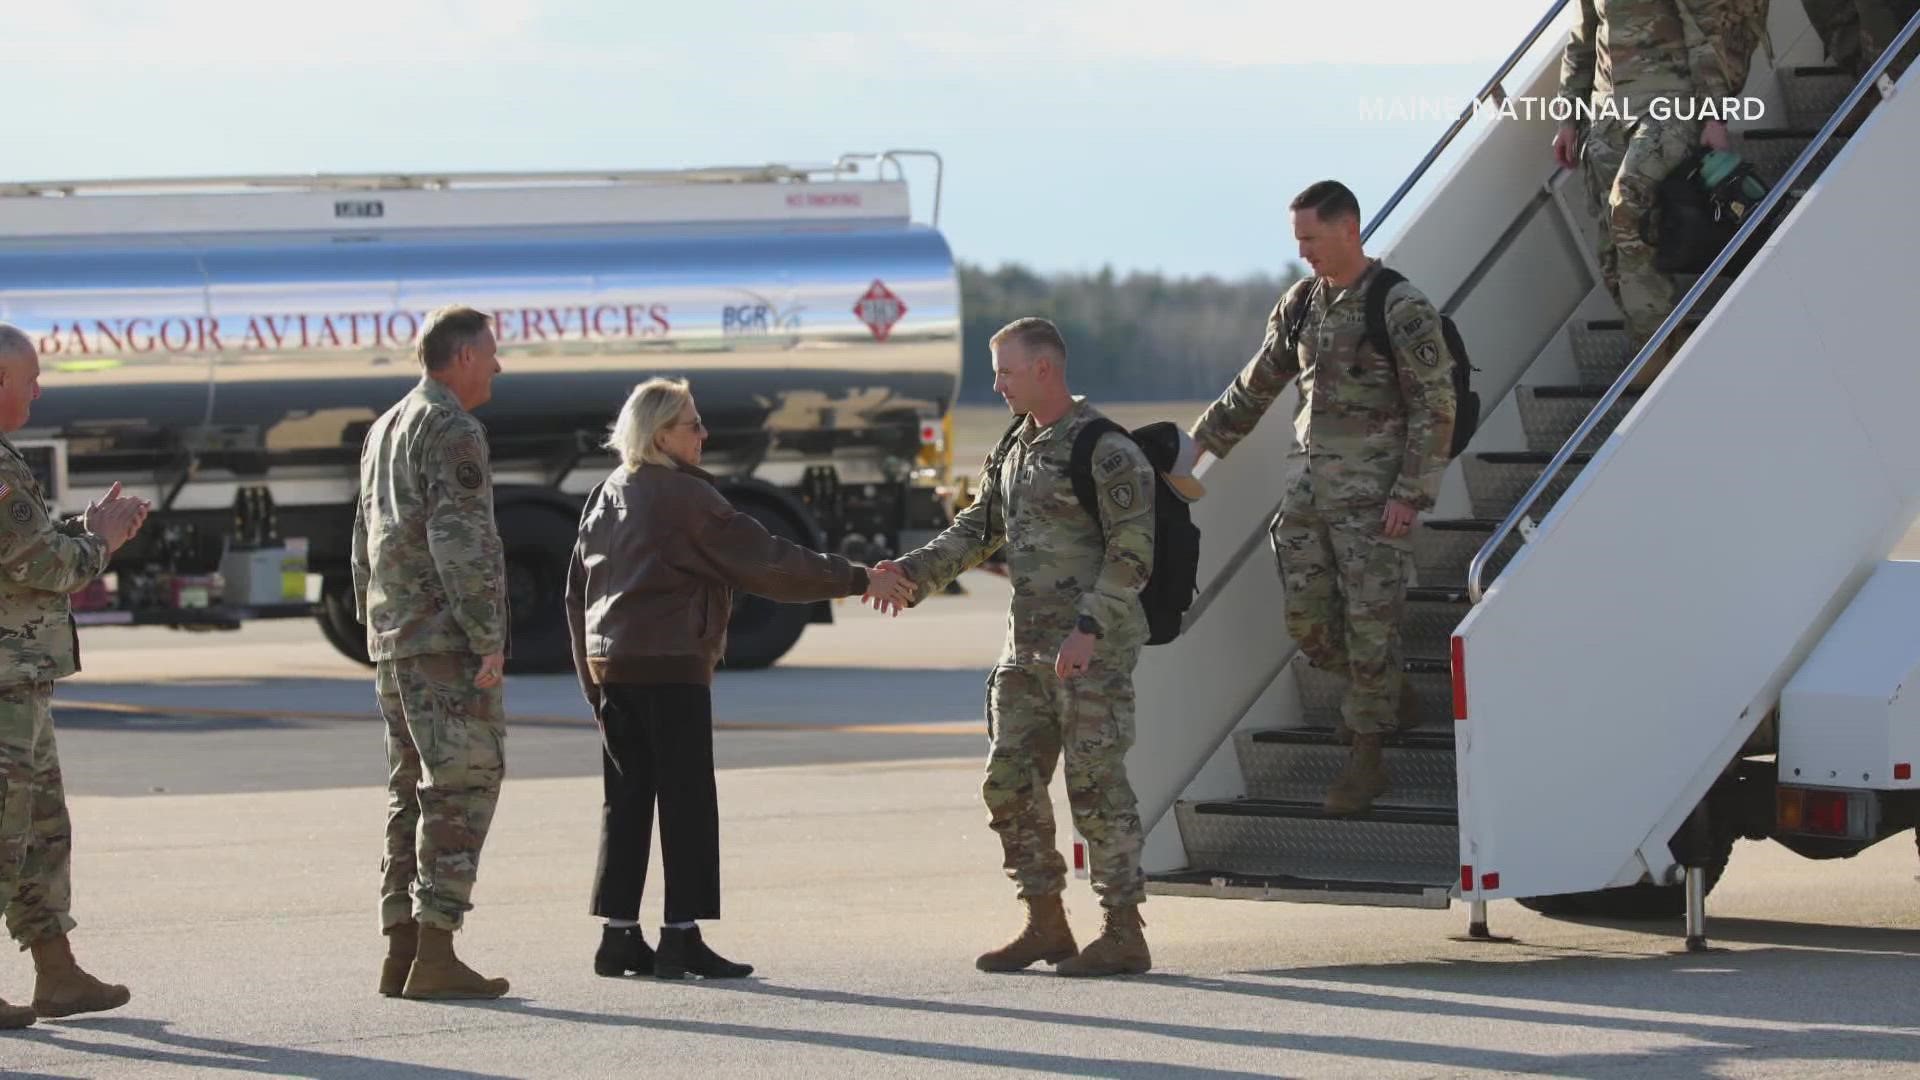 After 13 months, the last group from the 488th Military Police Company arrived in Bangor on Wednesday.